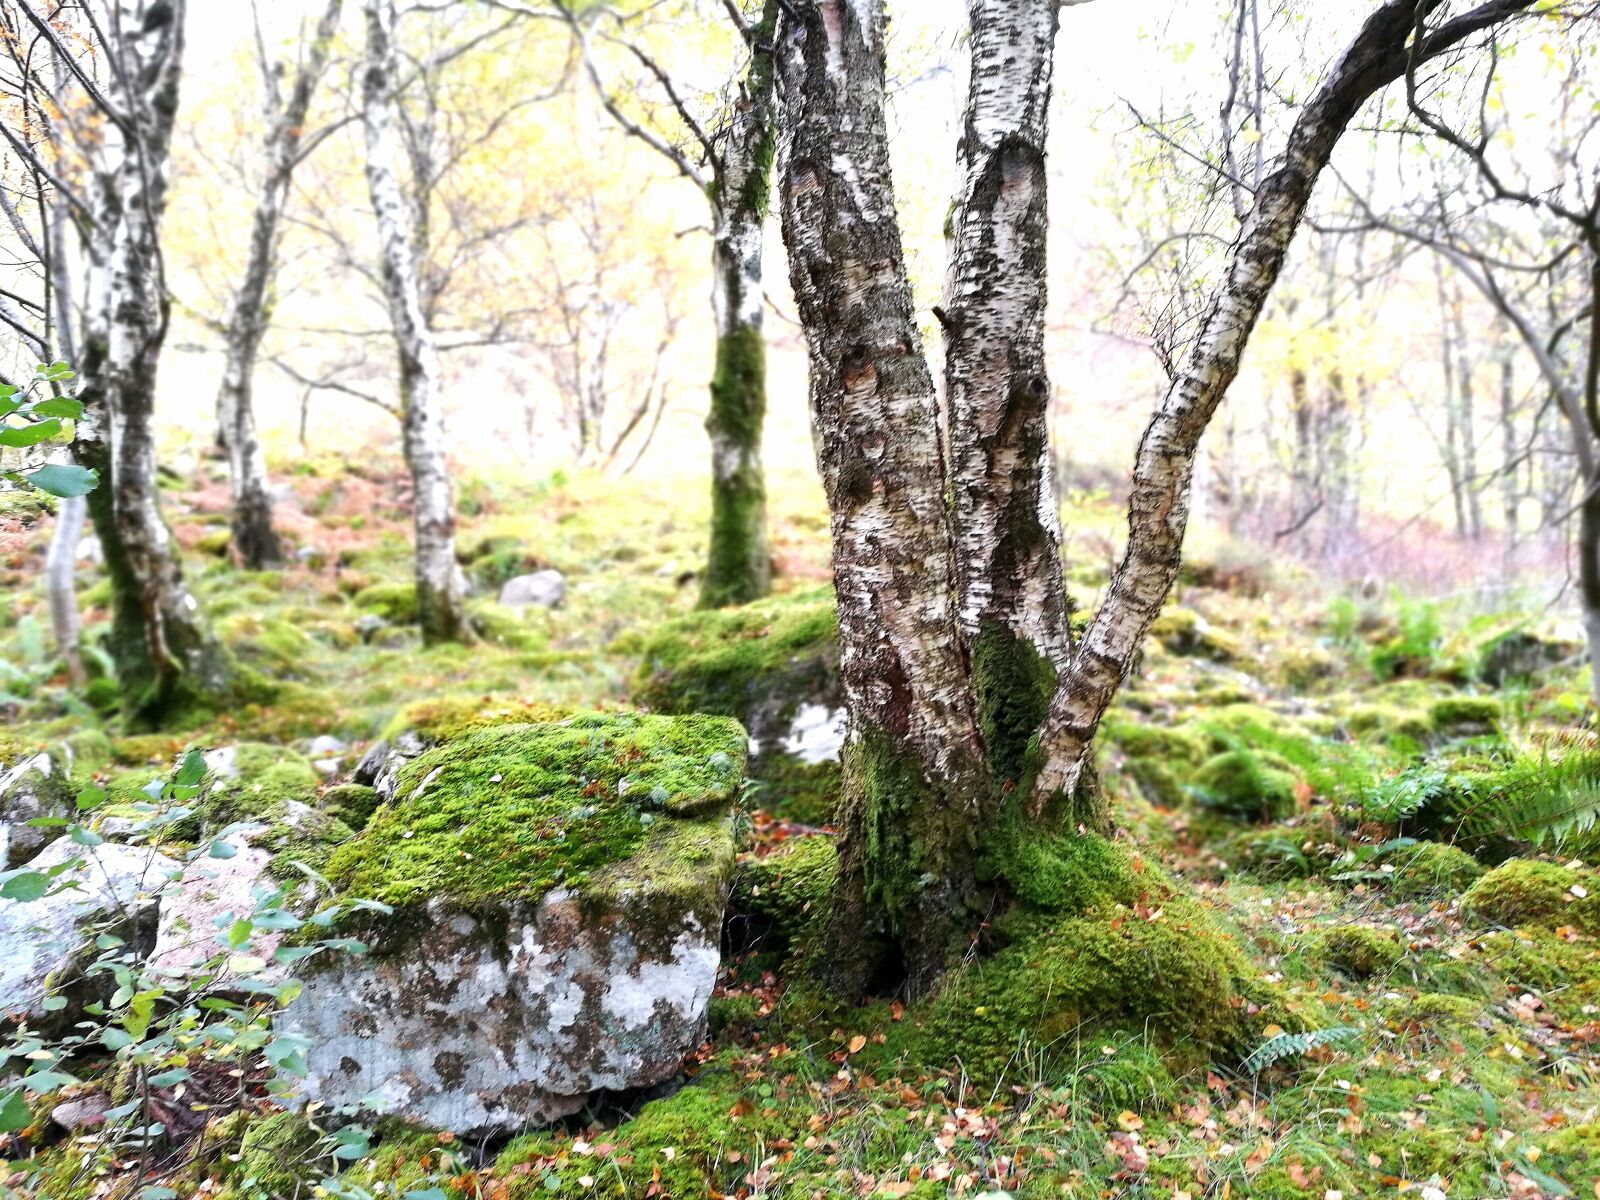 HUAWEI Honor 8 sample photo. Birch, scotland, forest photography